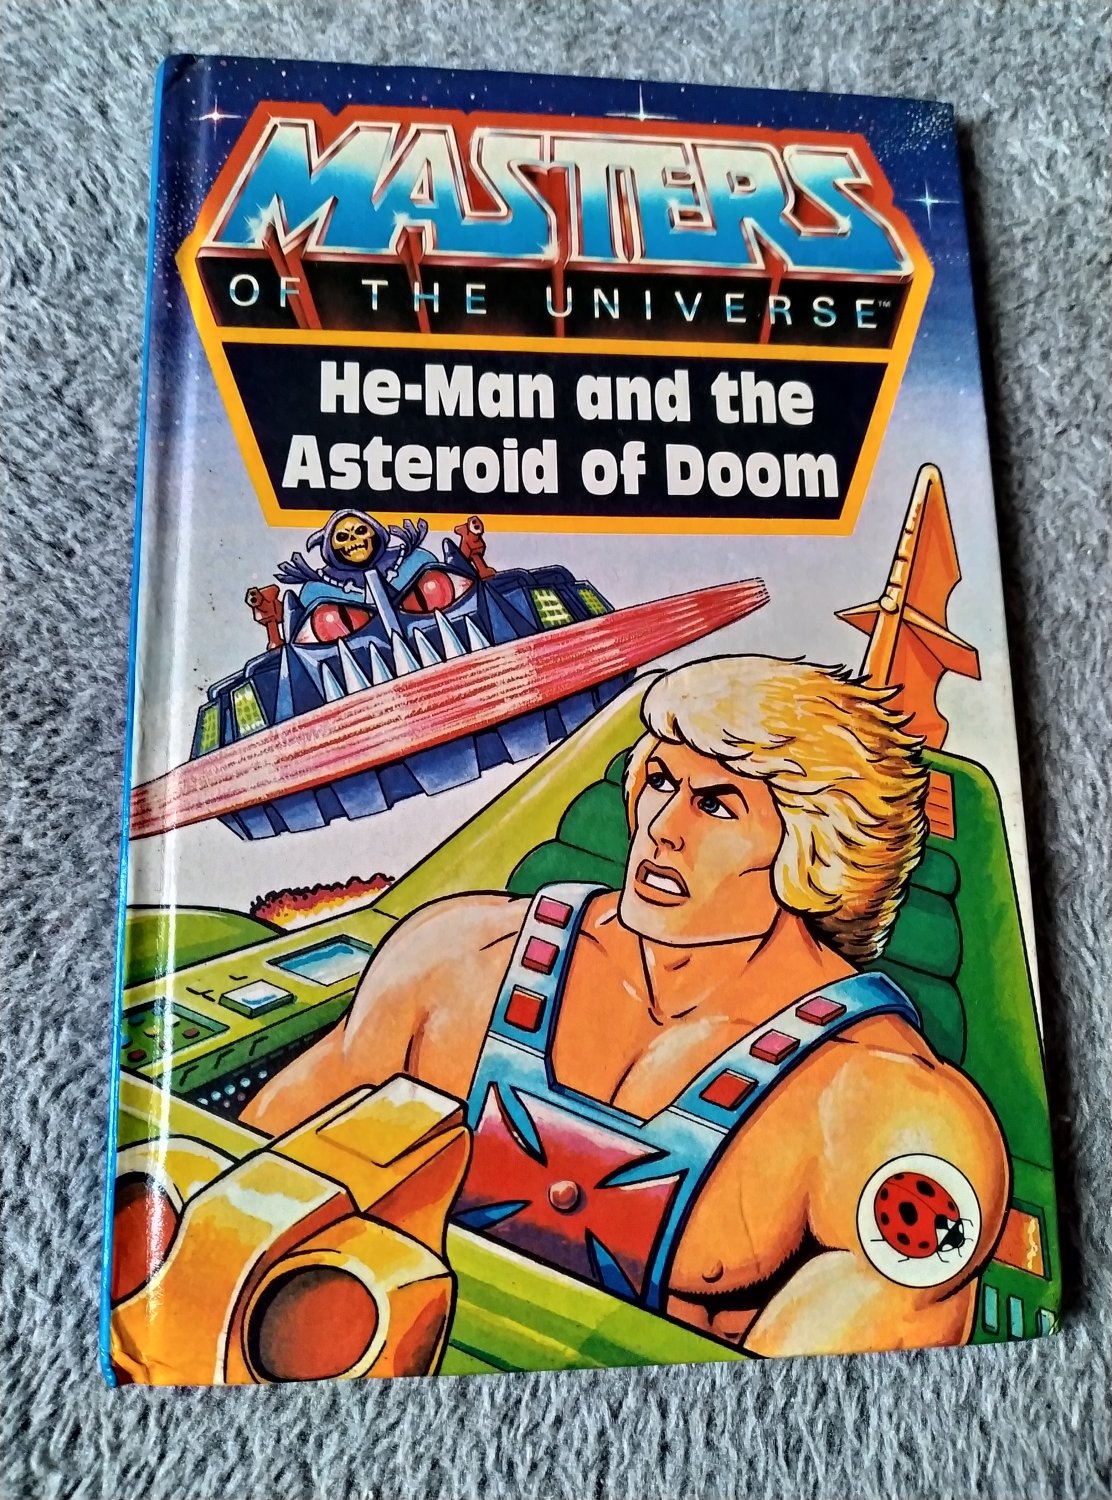 He-man and the Asteroid of Doom (Book)